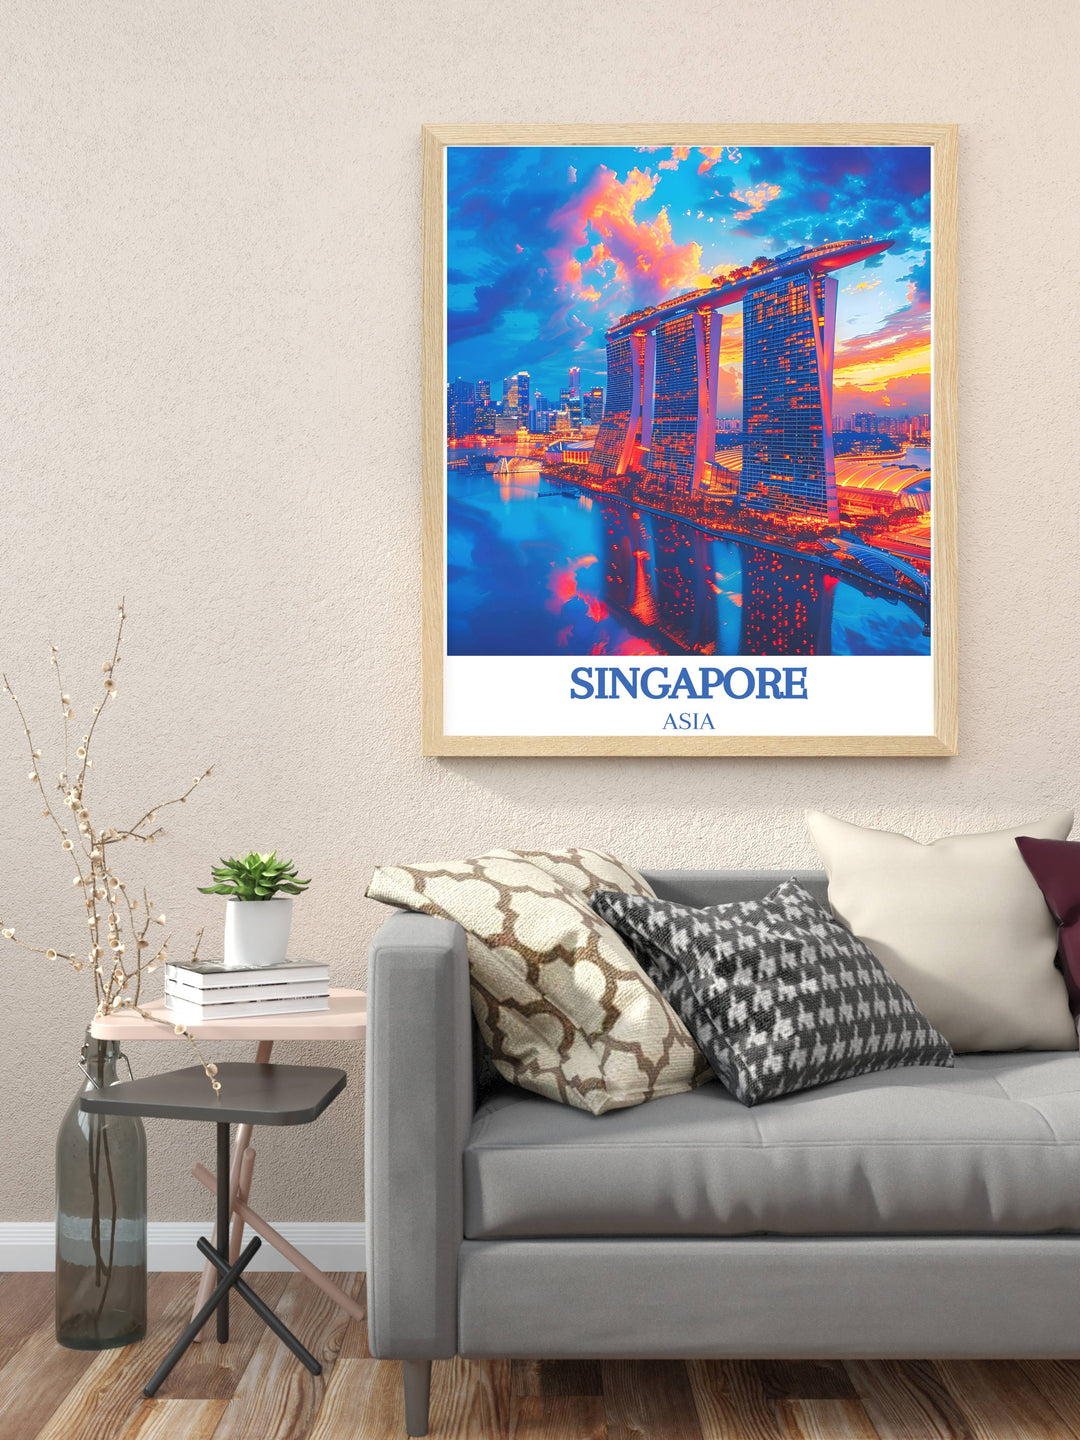 Marina Bay Sands Gallery Wall Art offering stunning views and intricate details, bringing the essence of Singapores luxury and progress into your home.